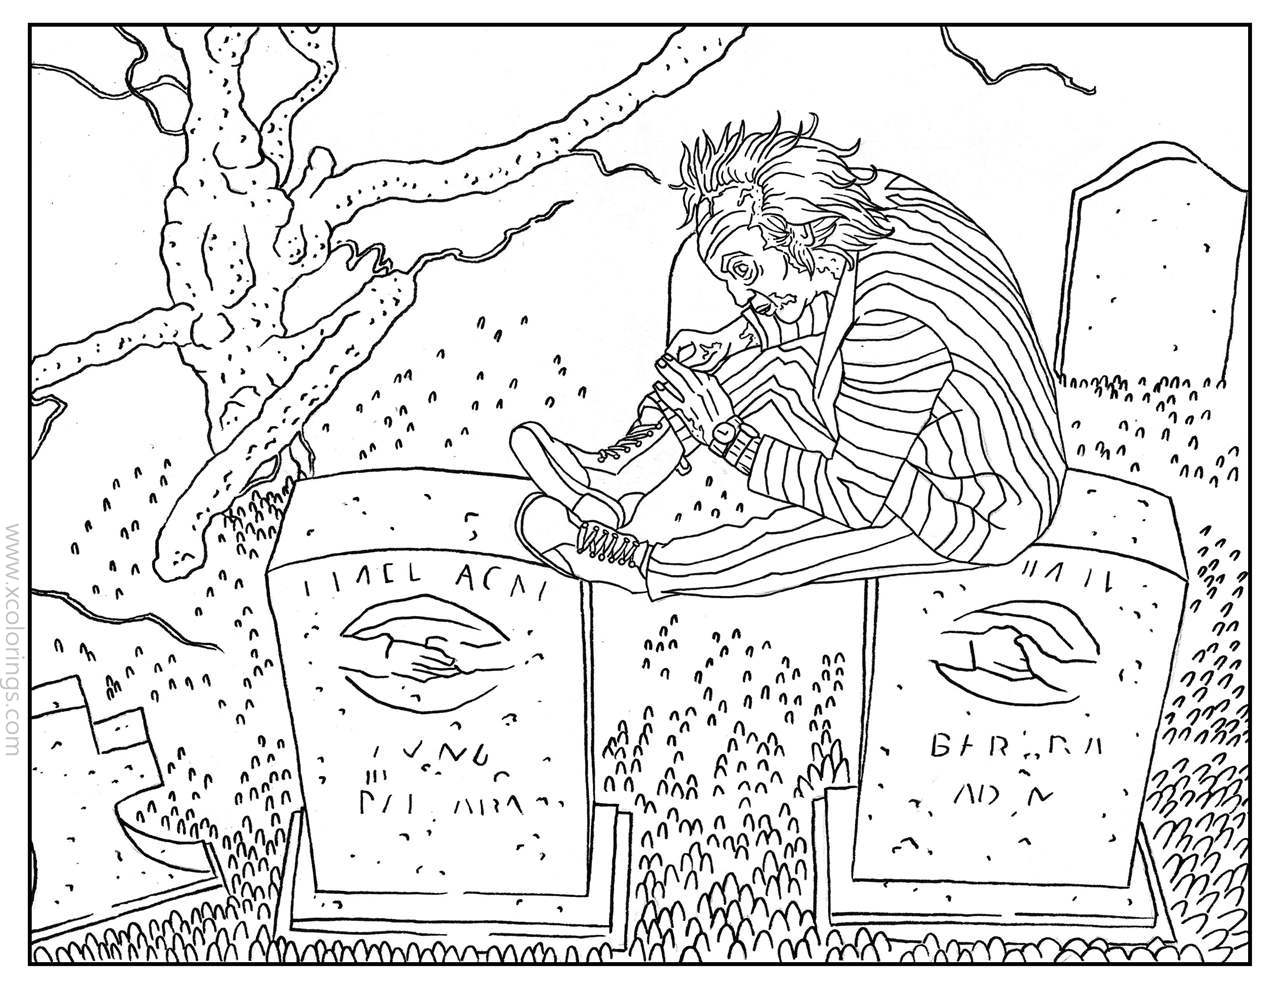 Free Beetlejuice at Cemetery Coloring Pages printable